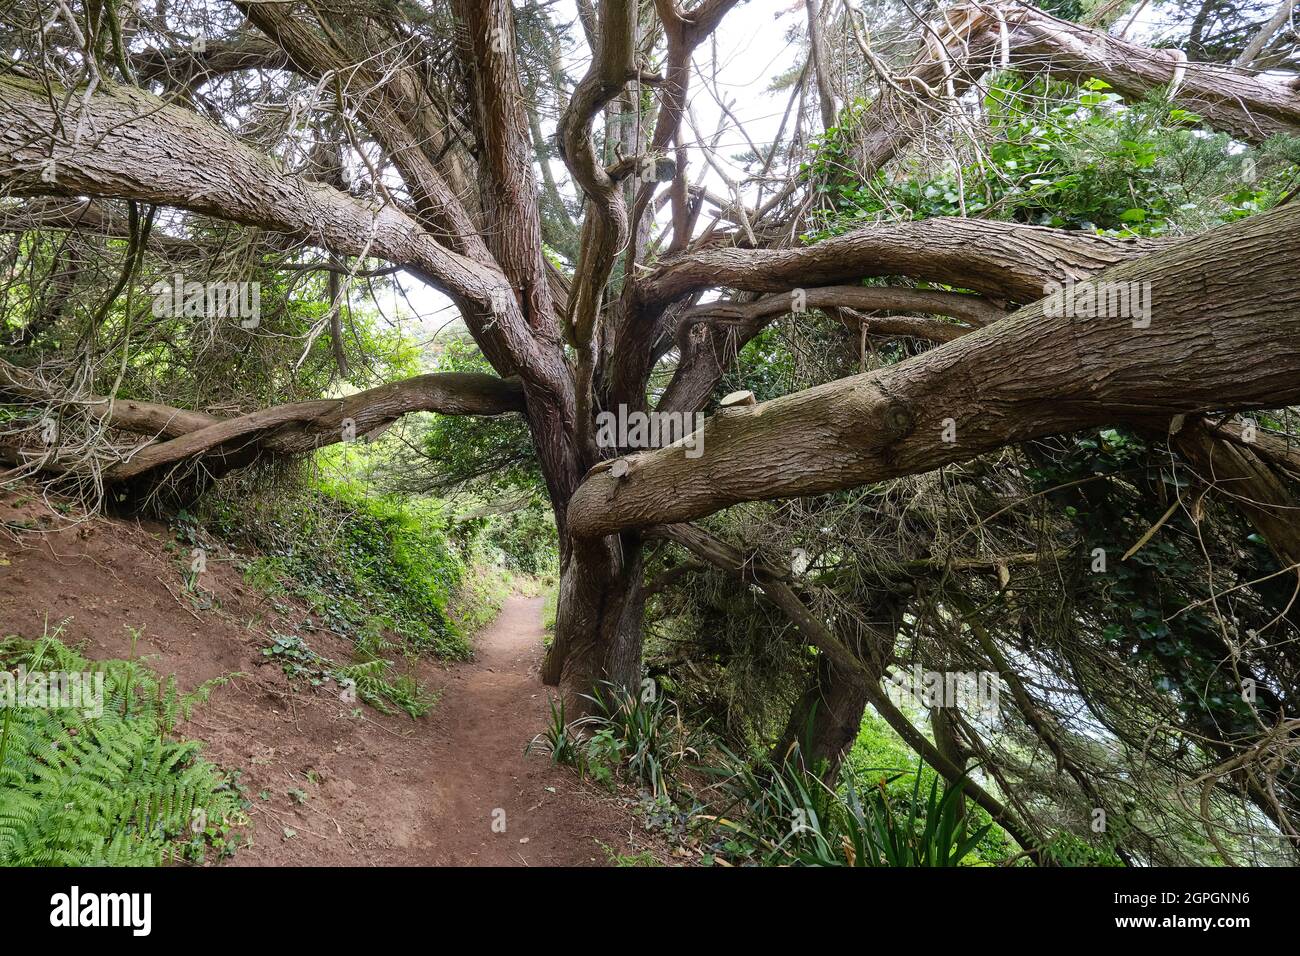 France, Ille et Vilaine, amazing tree along the GR 34 hiking trail or customs footpath near the beach of la Touesse Stock Photo